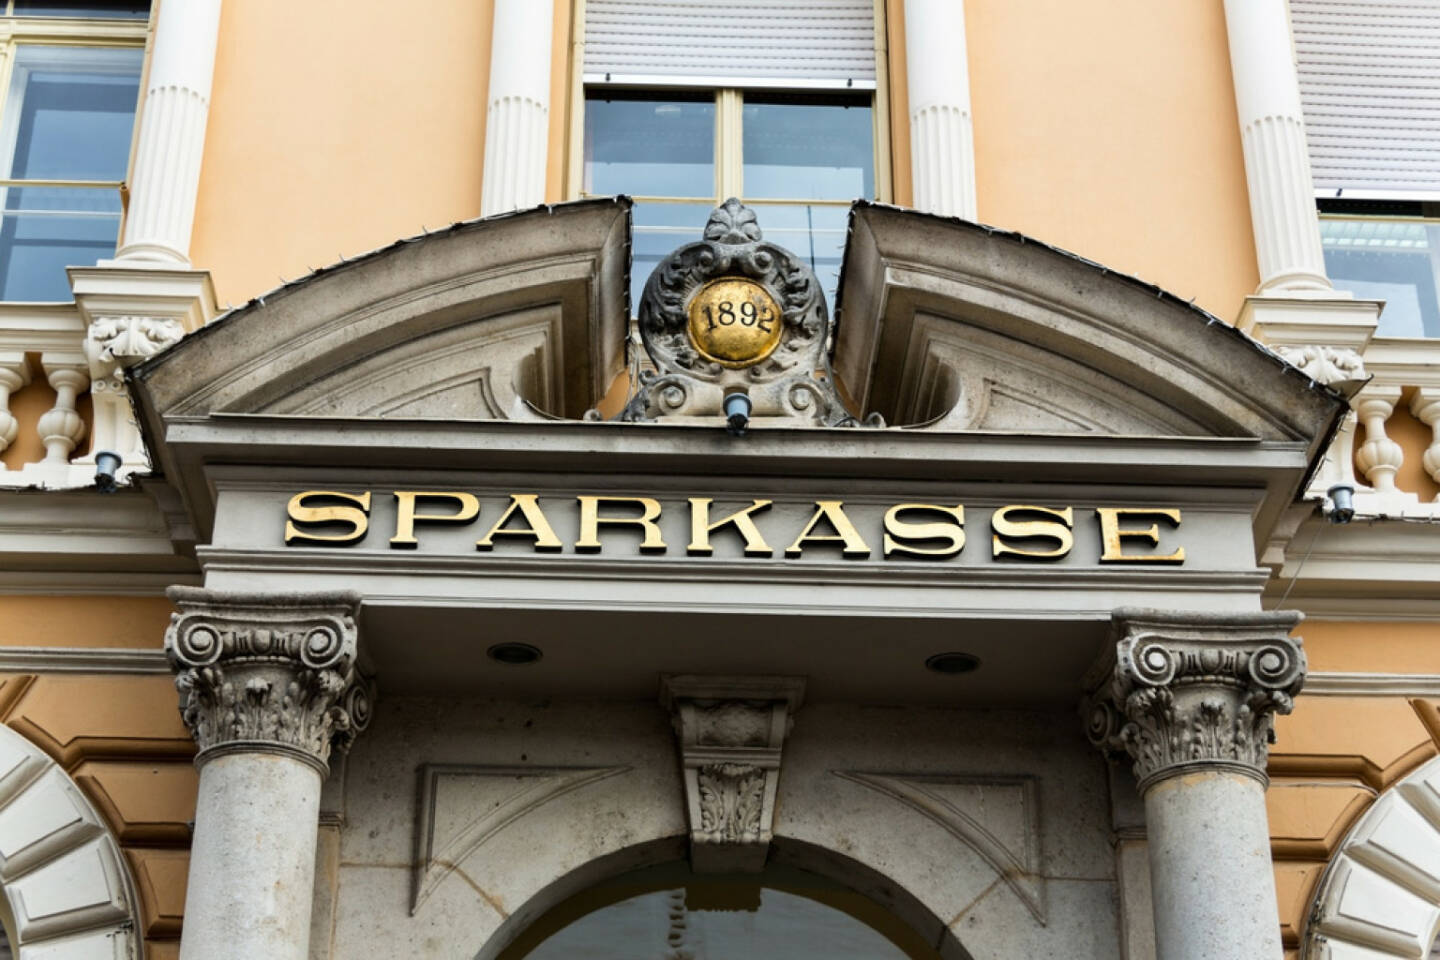 Sparkasse, Bank, http://www.shutterstock.com/de/pic-170407313/stock-photo-the-words-savings-bank-on-a-building.html